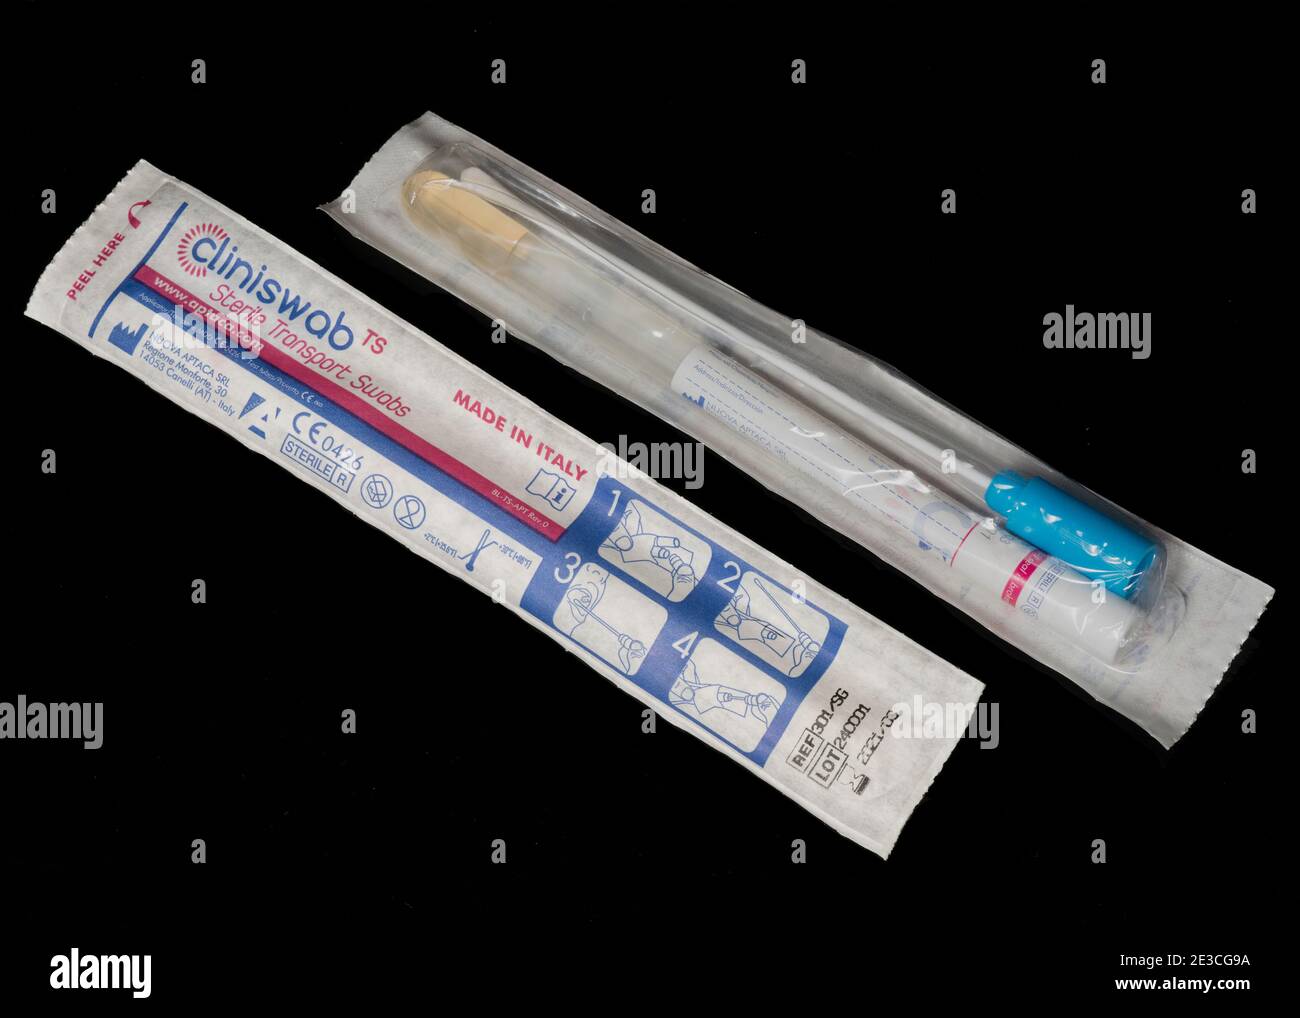 Cliniswab microbiology sterile transport swabs by Nuova Aptaca Srl. on black. Microbiology medical healthcare products. Stock Photo